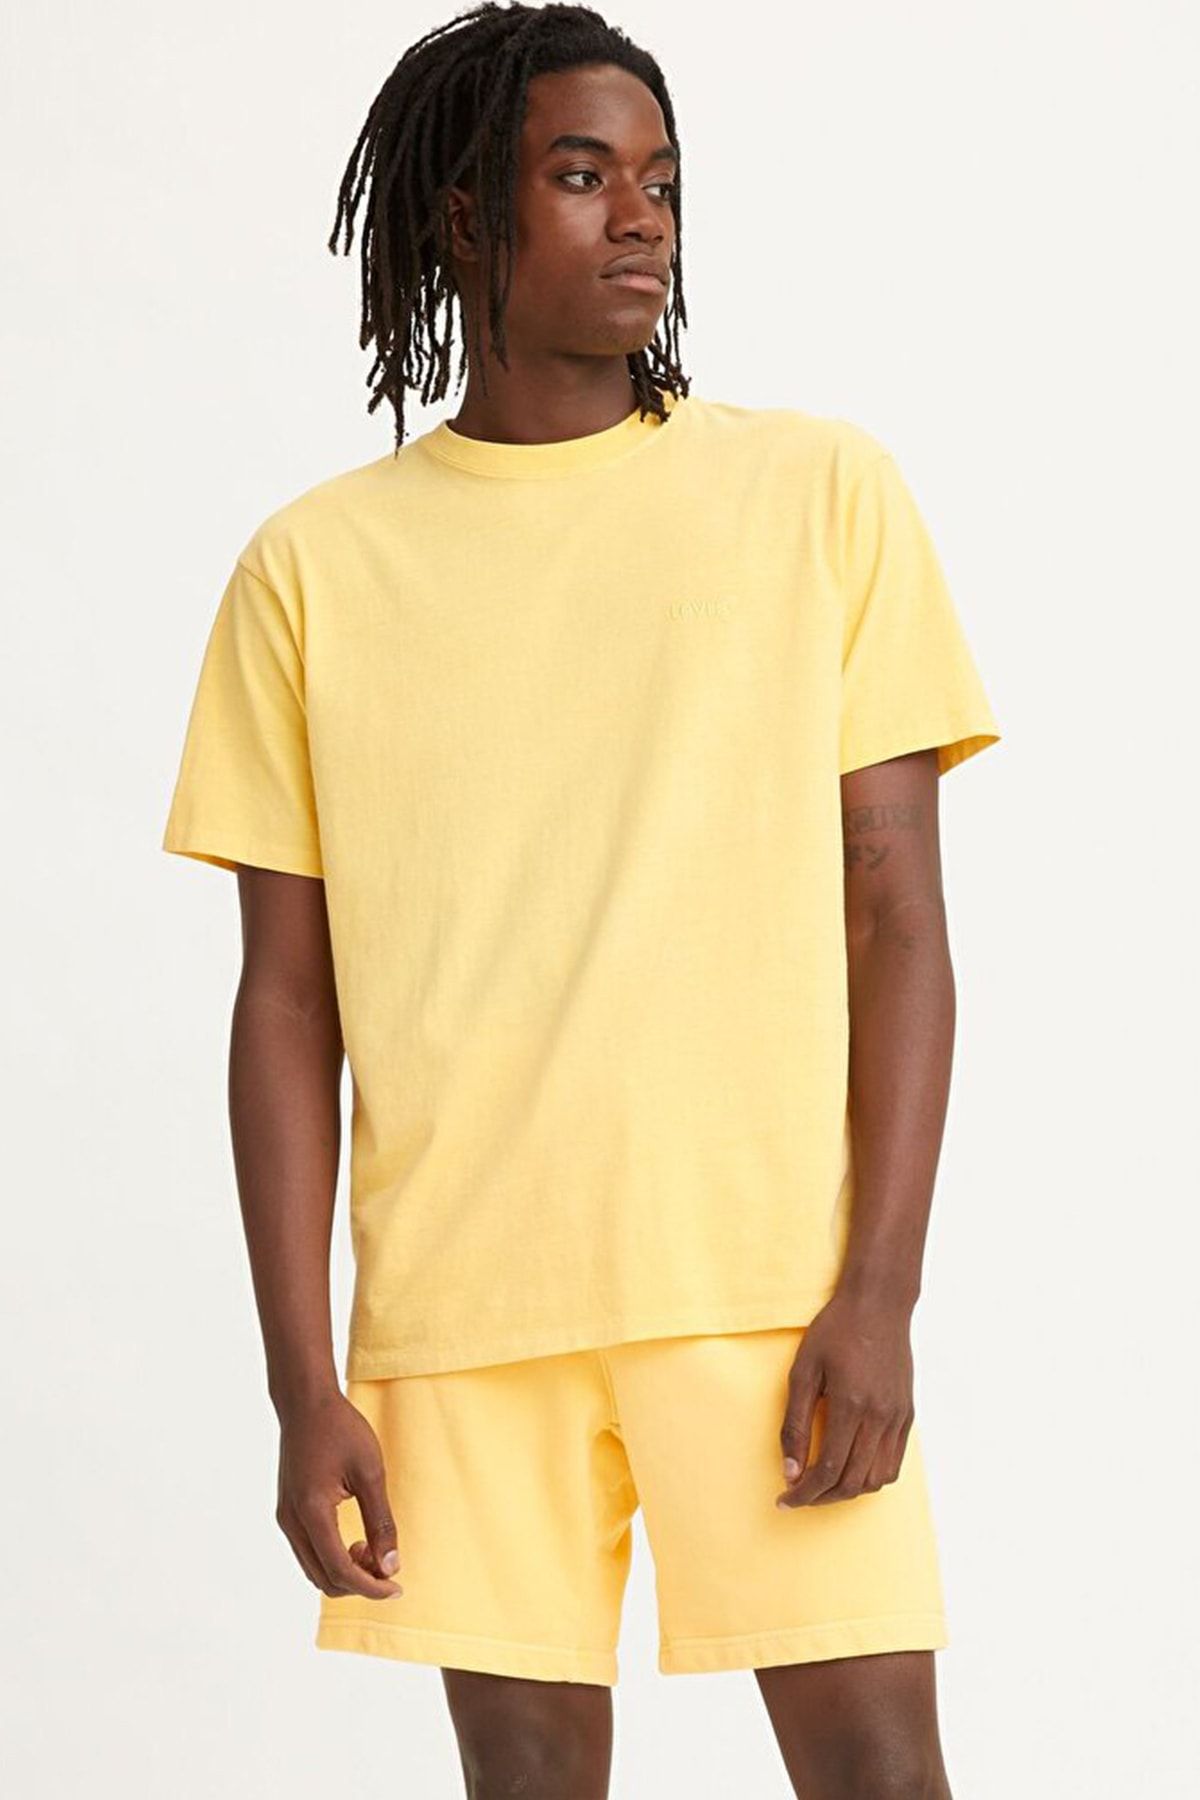 Levi's Red Tab Vıntage Tee Natural Dye Yellow